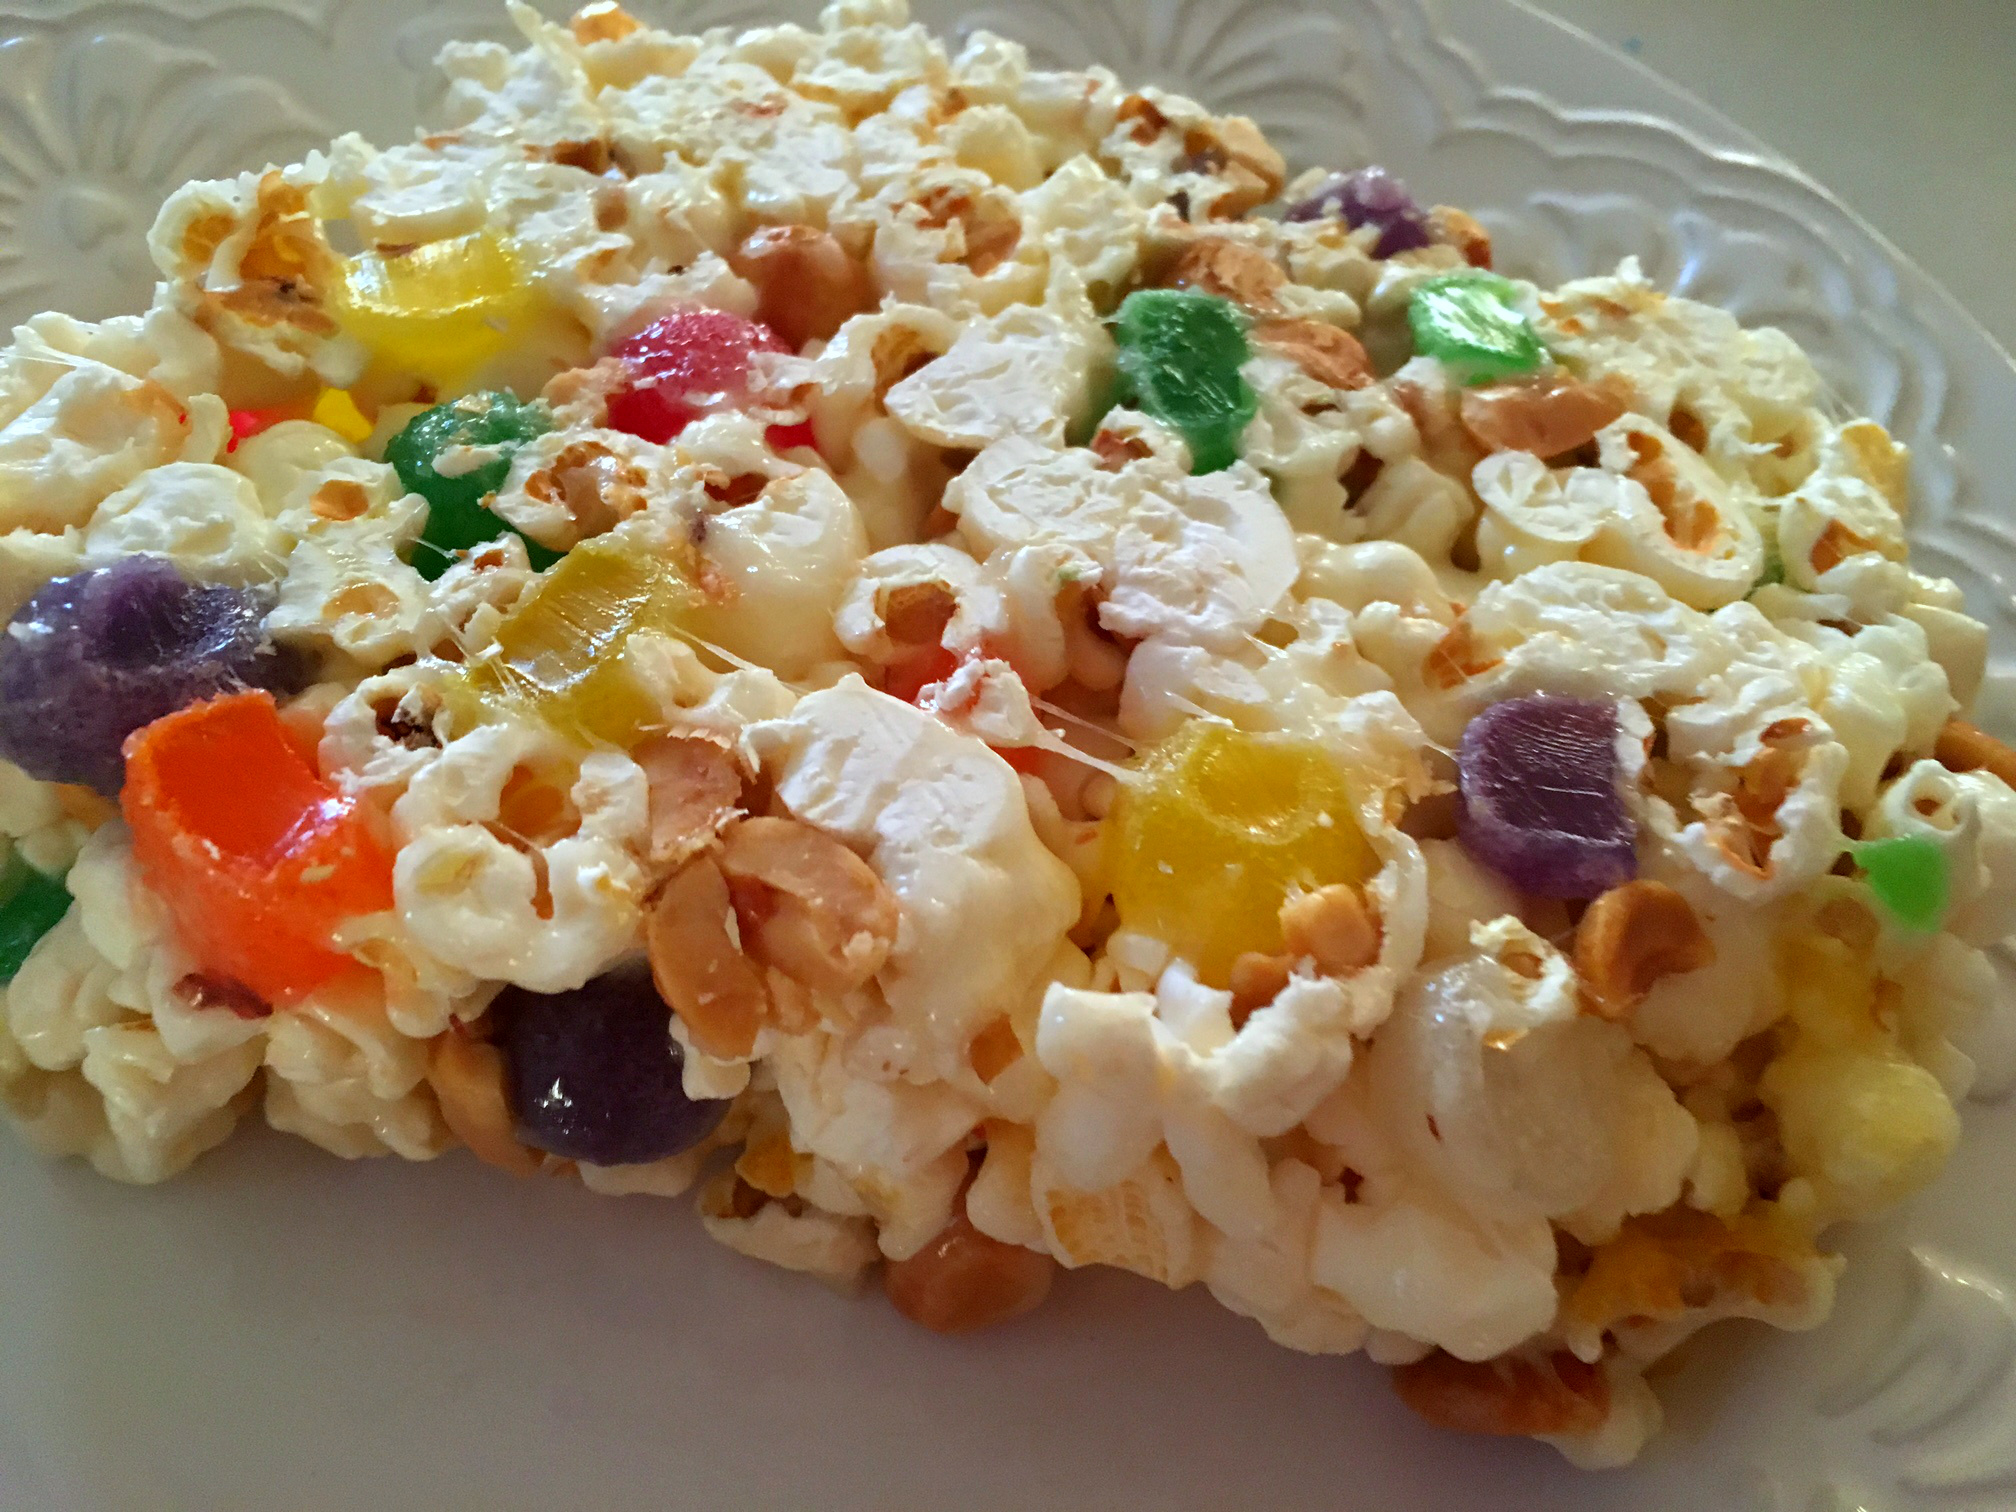 Popcorn Party Cake - Sugar and Spice